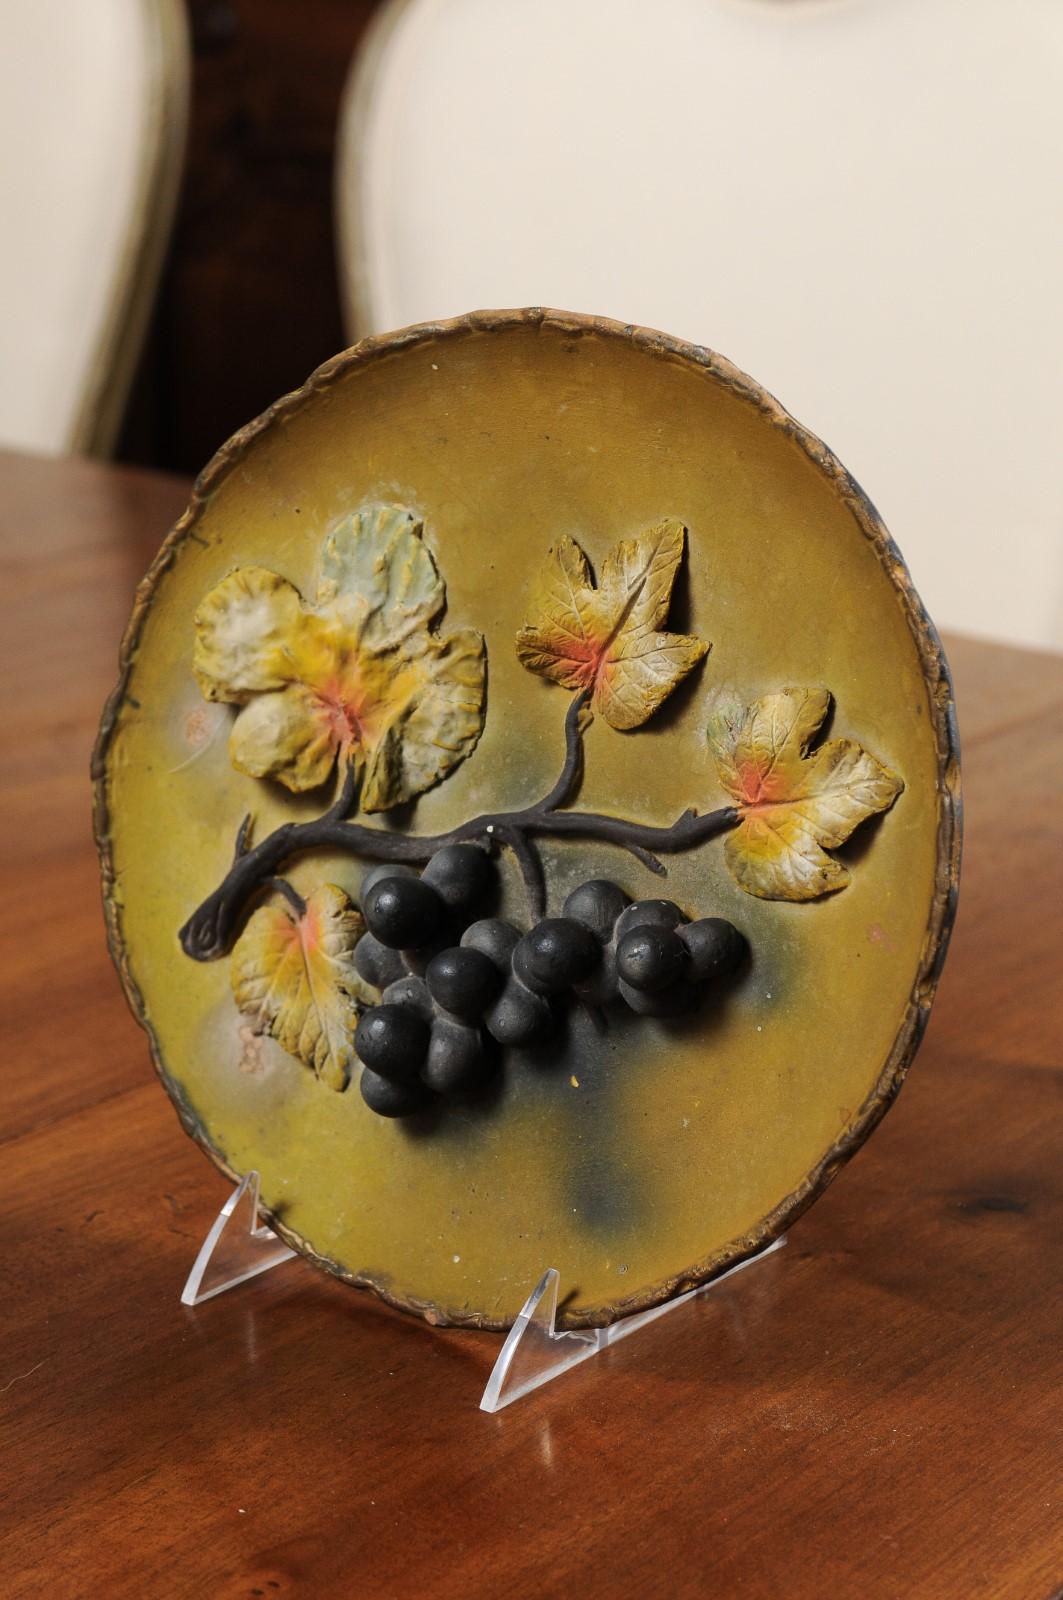 French 20th Century Wall Hanging Pottery Plate with Black Grapes Motifs For Sale 4